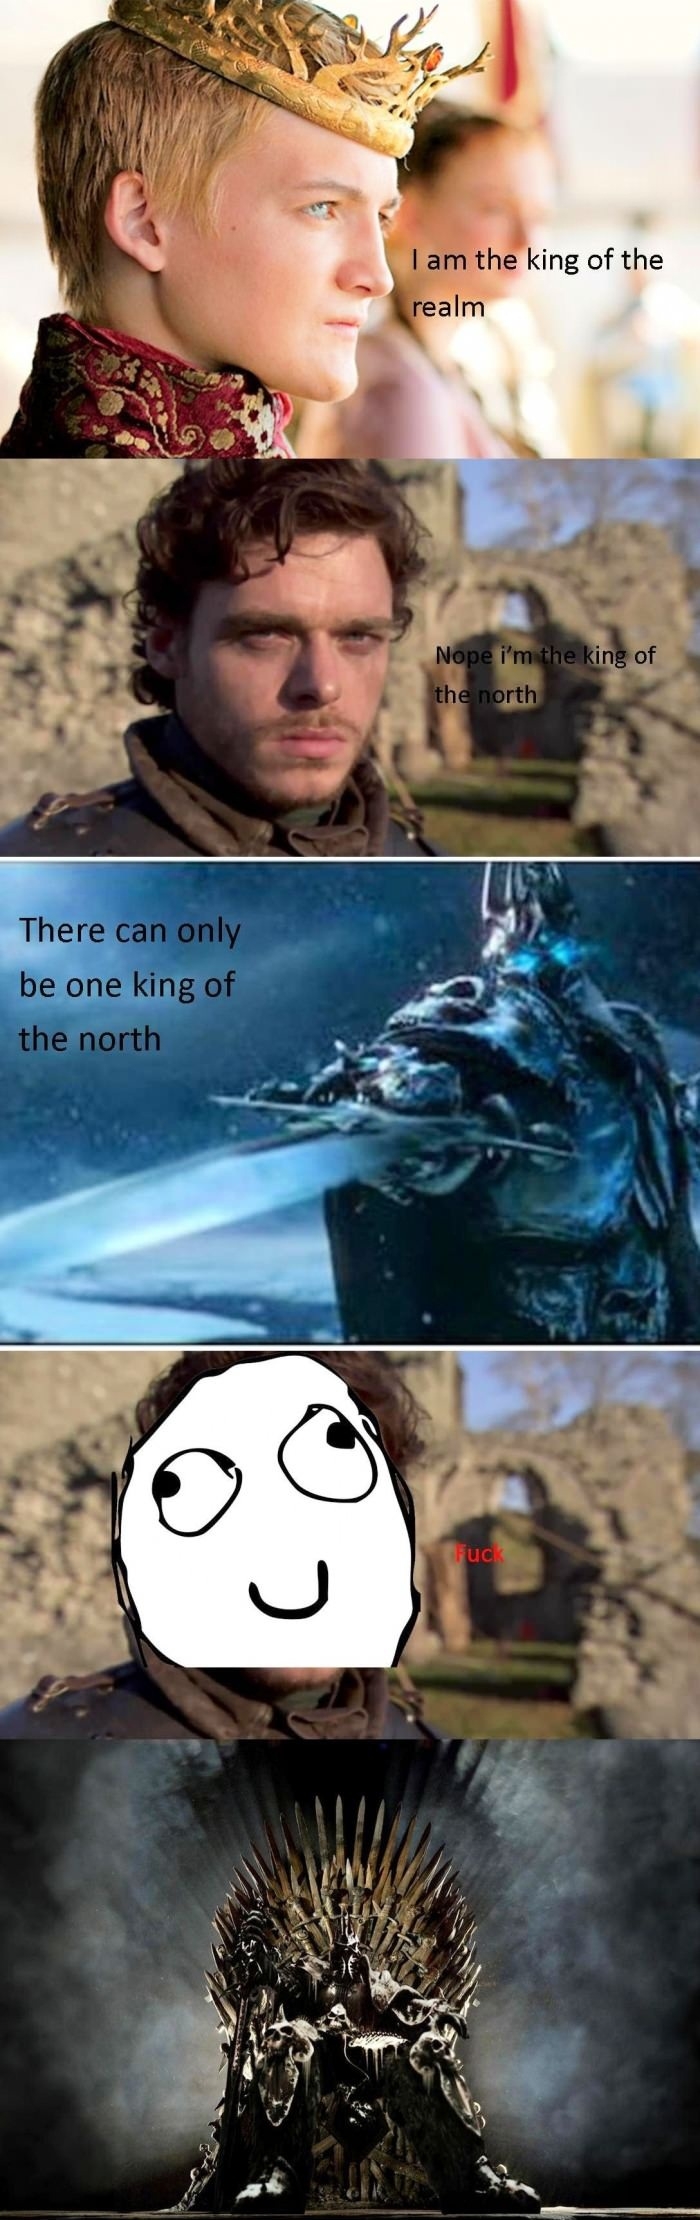 Game of Thrones vs. WoW